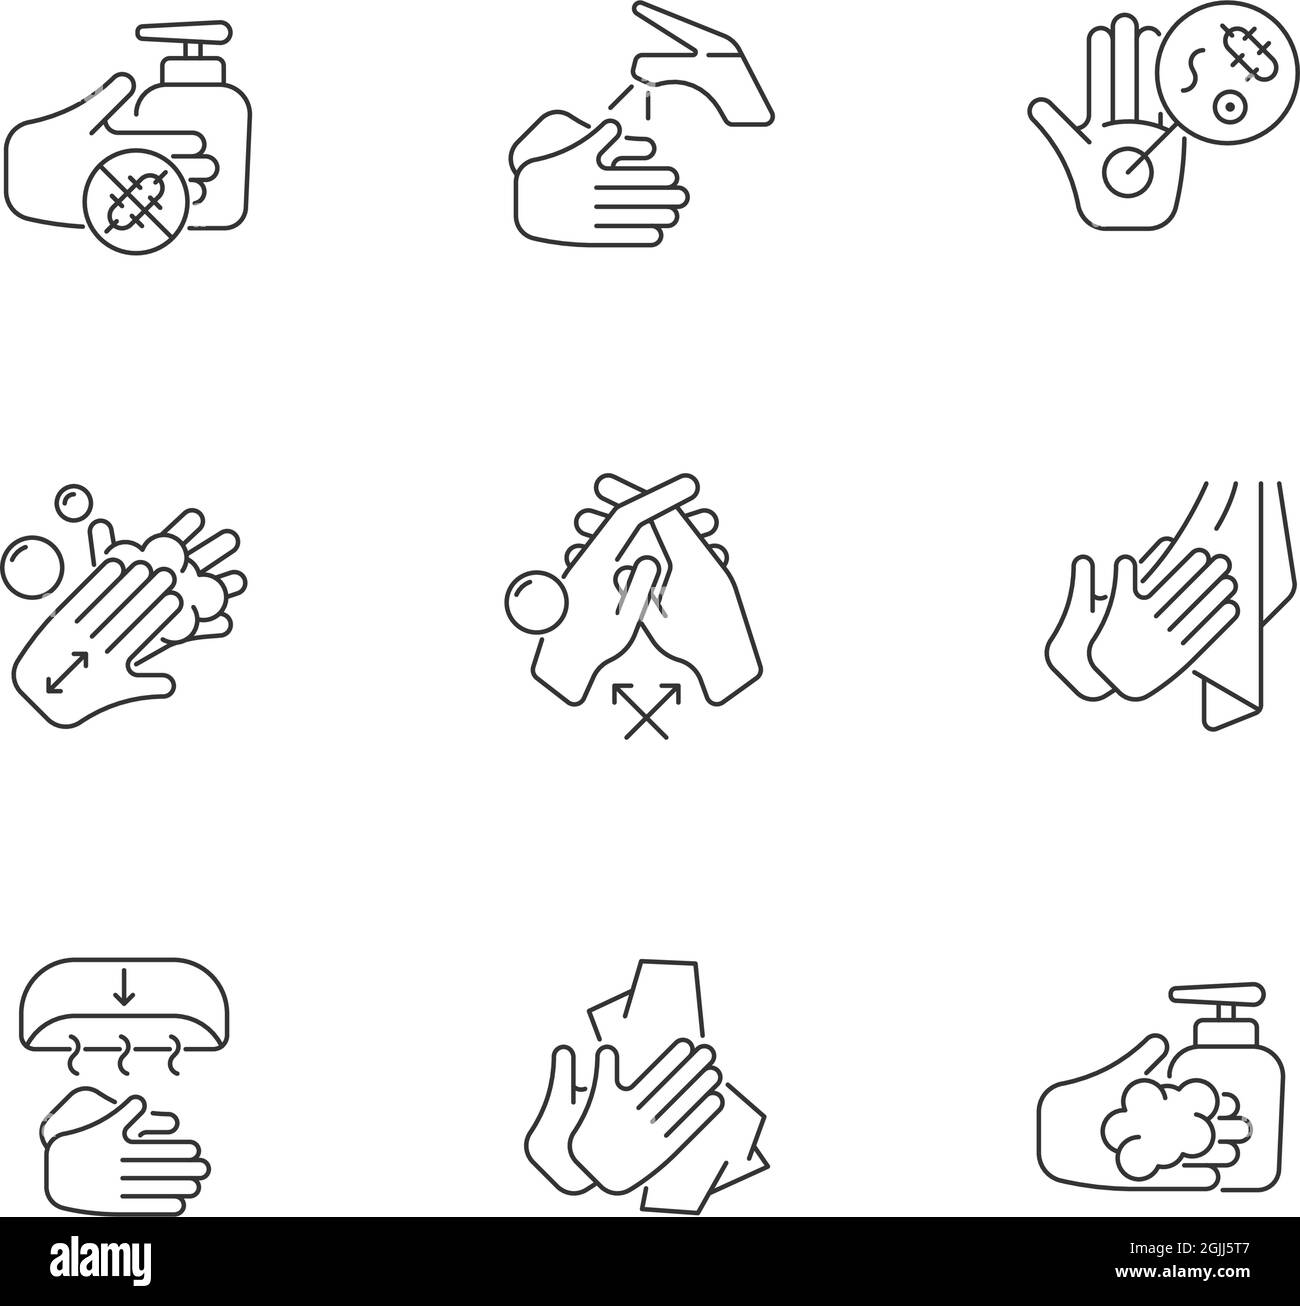 Hand washing steps linear icons set Stock Vector